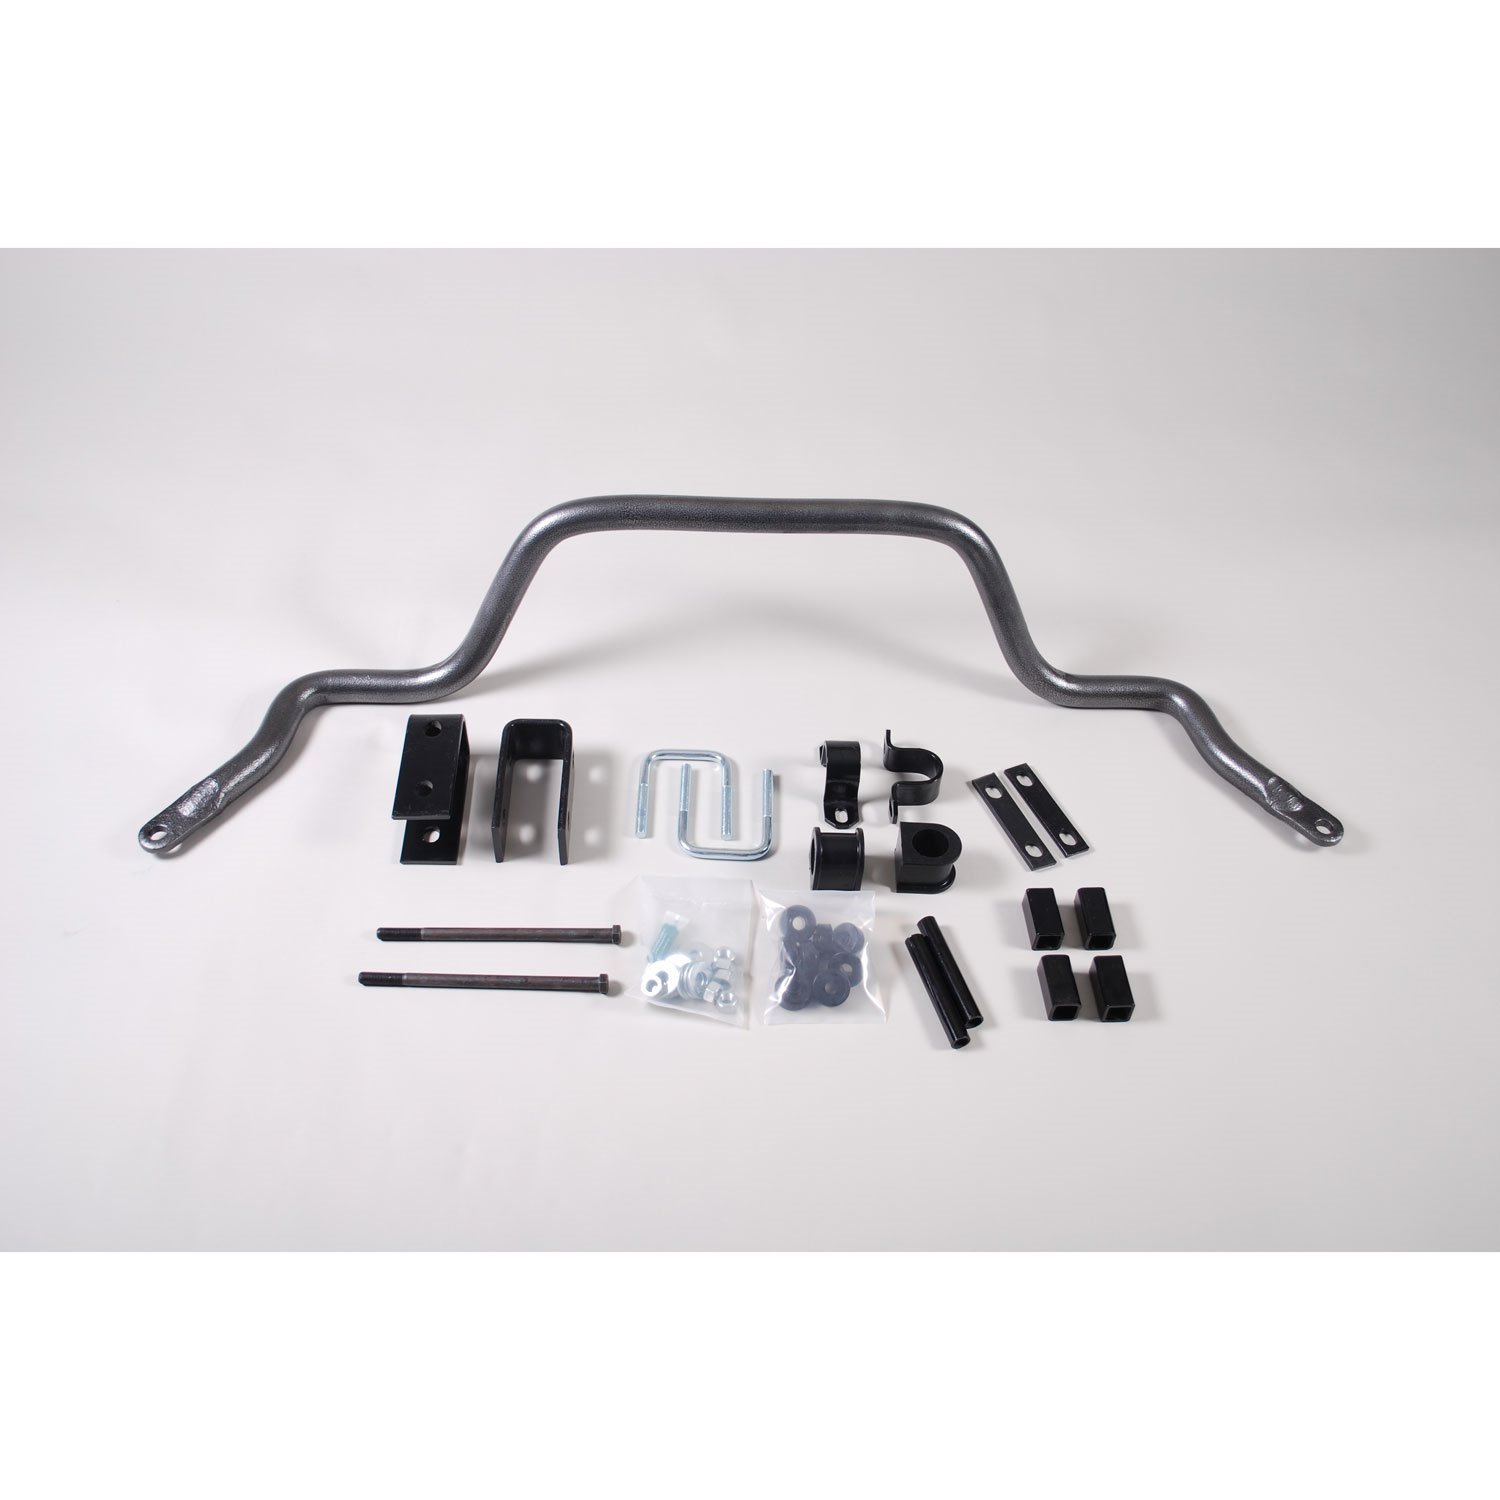 Front Sway Bar for 1979-1993 Ford Mustang and 1979-1986 Mercury Capri w/4 or 6 cylinder engine